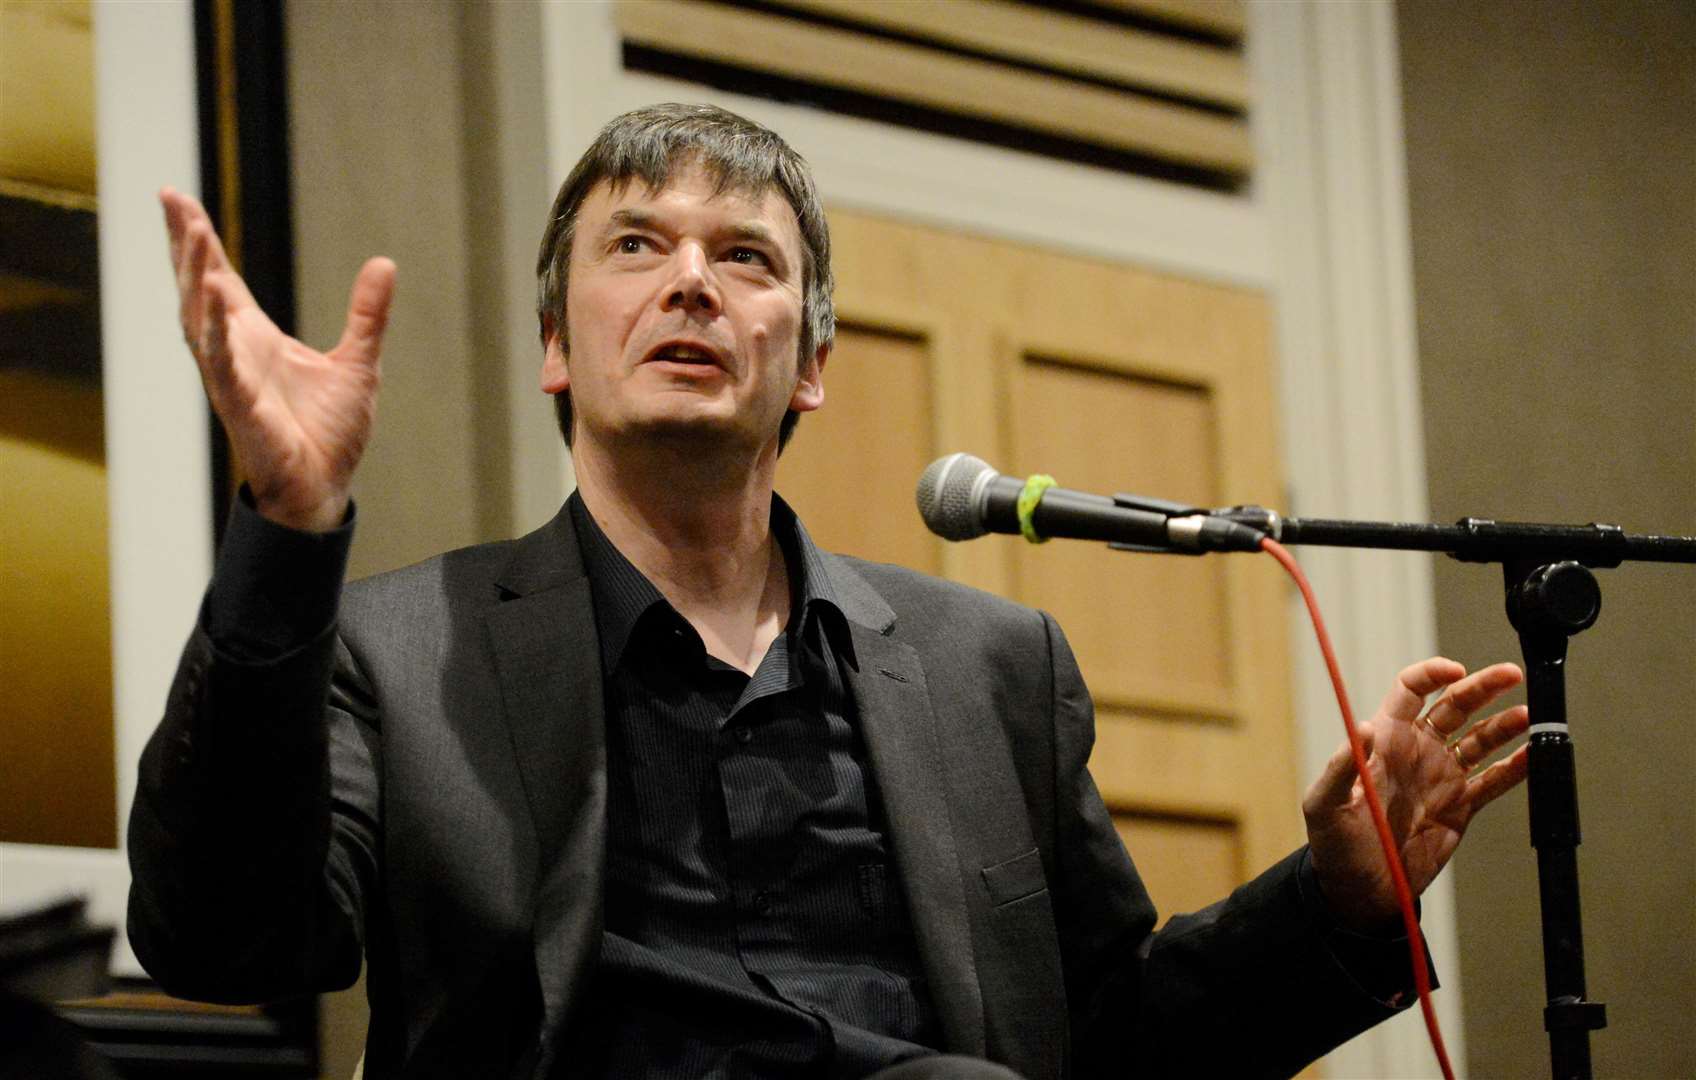 Ian Rankin’s iconic Inspector Rebus series inspired a new TV show. Picture: Alison White.